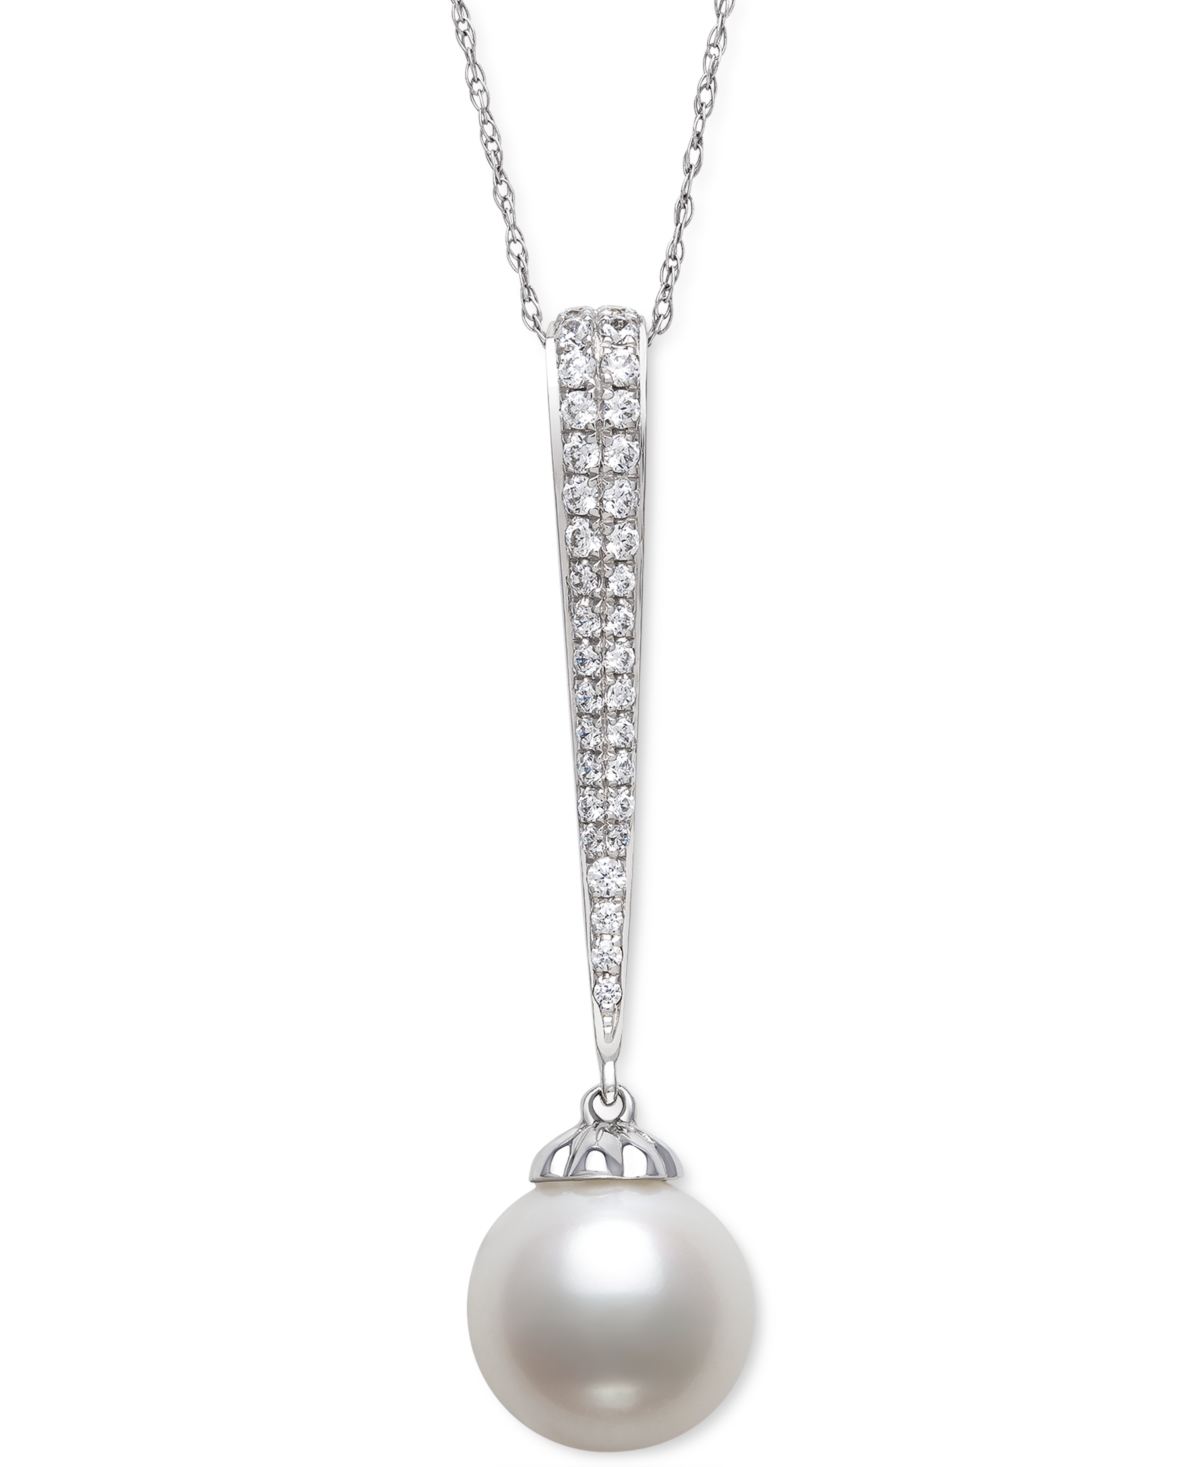 Cultured Freshwater Pearl (9mm) & Diamond (1/5 ct. t.w.) Pave Elongated 18" Pendant Necklace in 14k White Gold, Created for Macy's - Whit